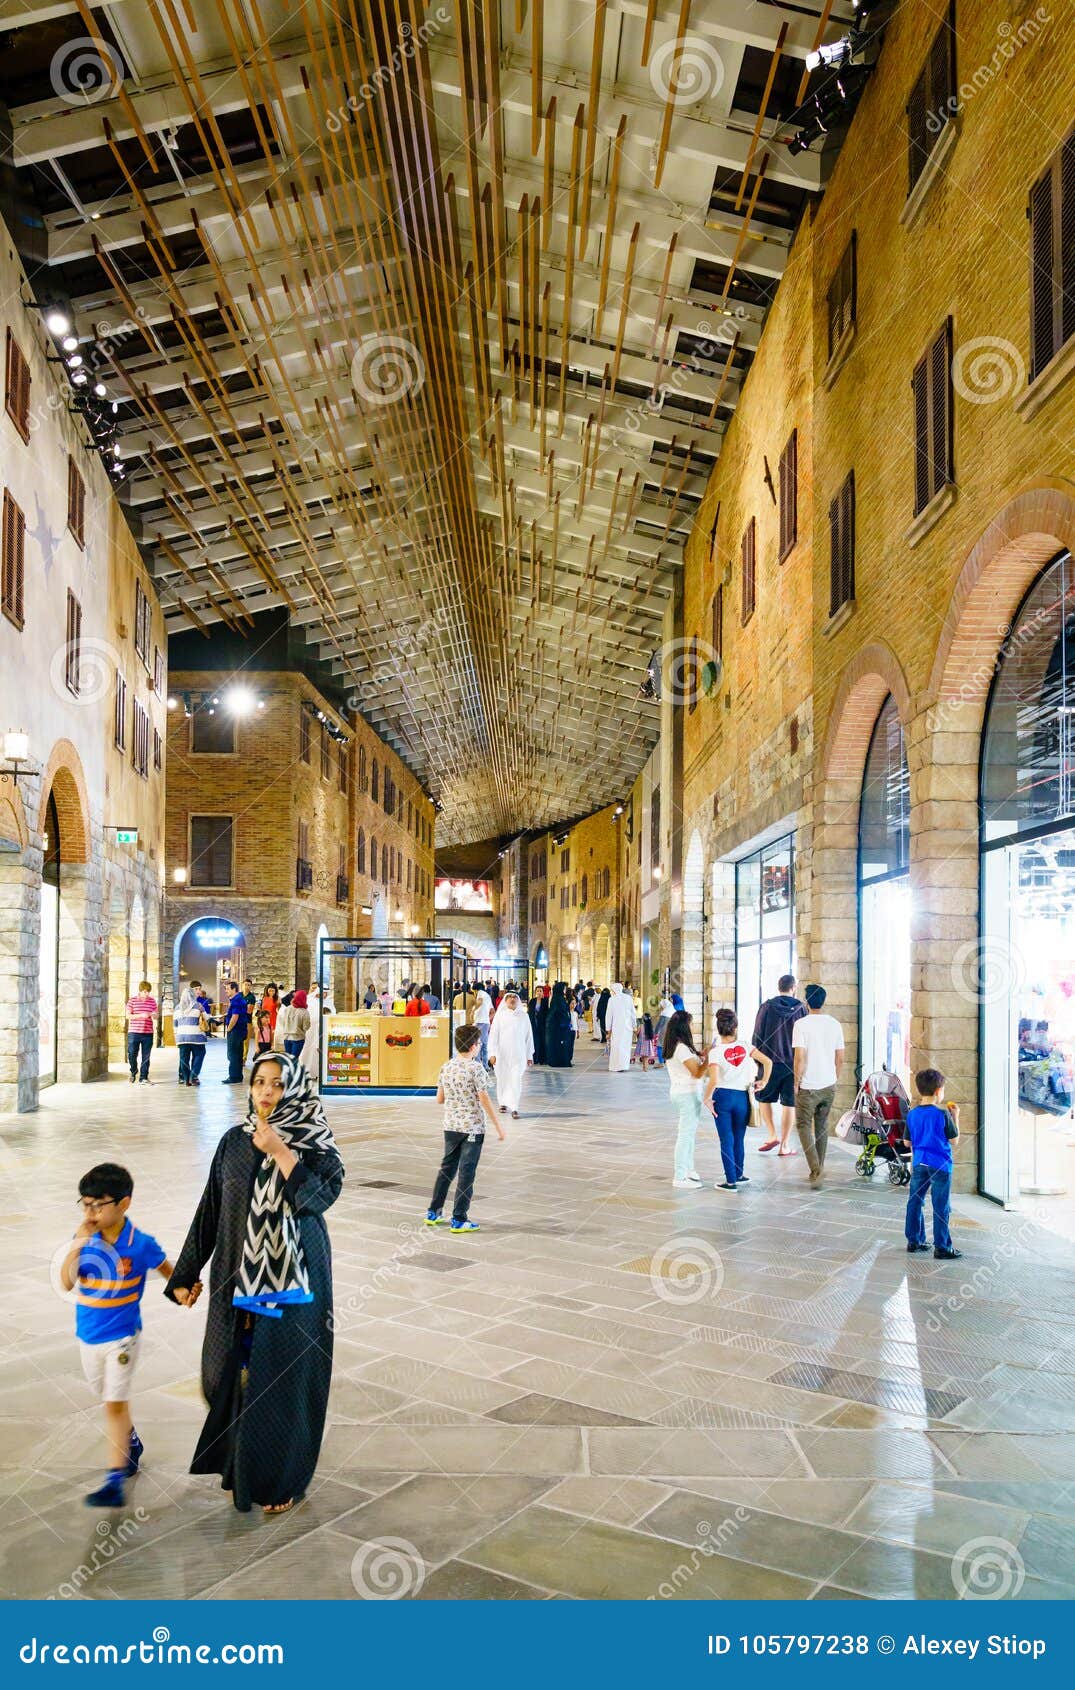 The Outlet Village In Dubai Editorial Stock Photo - Image of commercial, shopping: 105797238